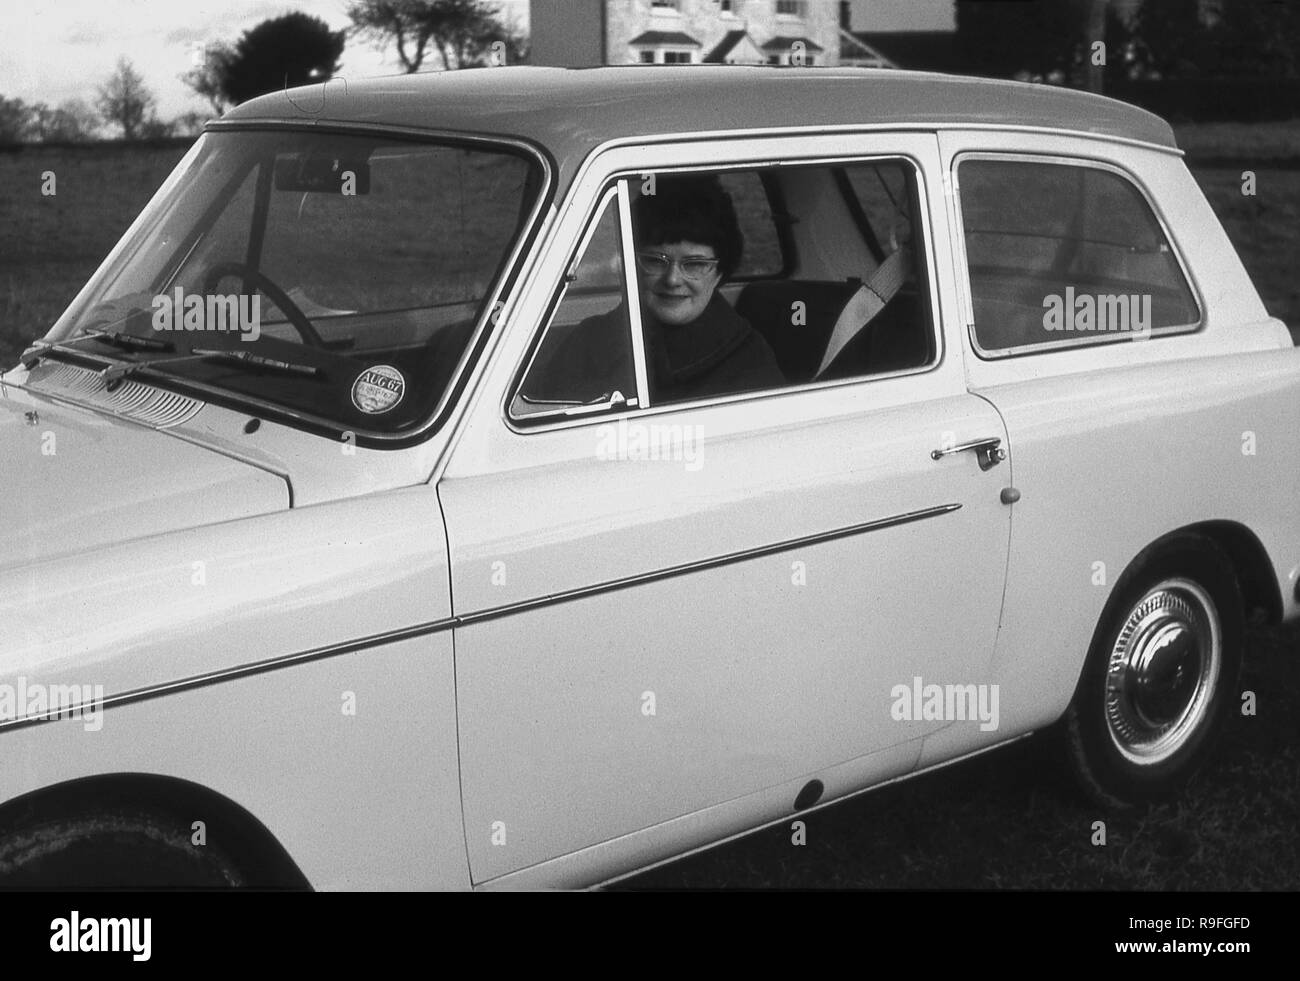 1960s, historical, a woman sitting in the passenger seat of a 3-door Austin A40 Farina car parked outside with the window open. This small family hatchback car was badged as an Austin A40 Farina to distinguish it from previous A40 models and was manufactured between 1958 -1967. Stock Photo